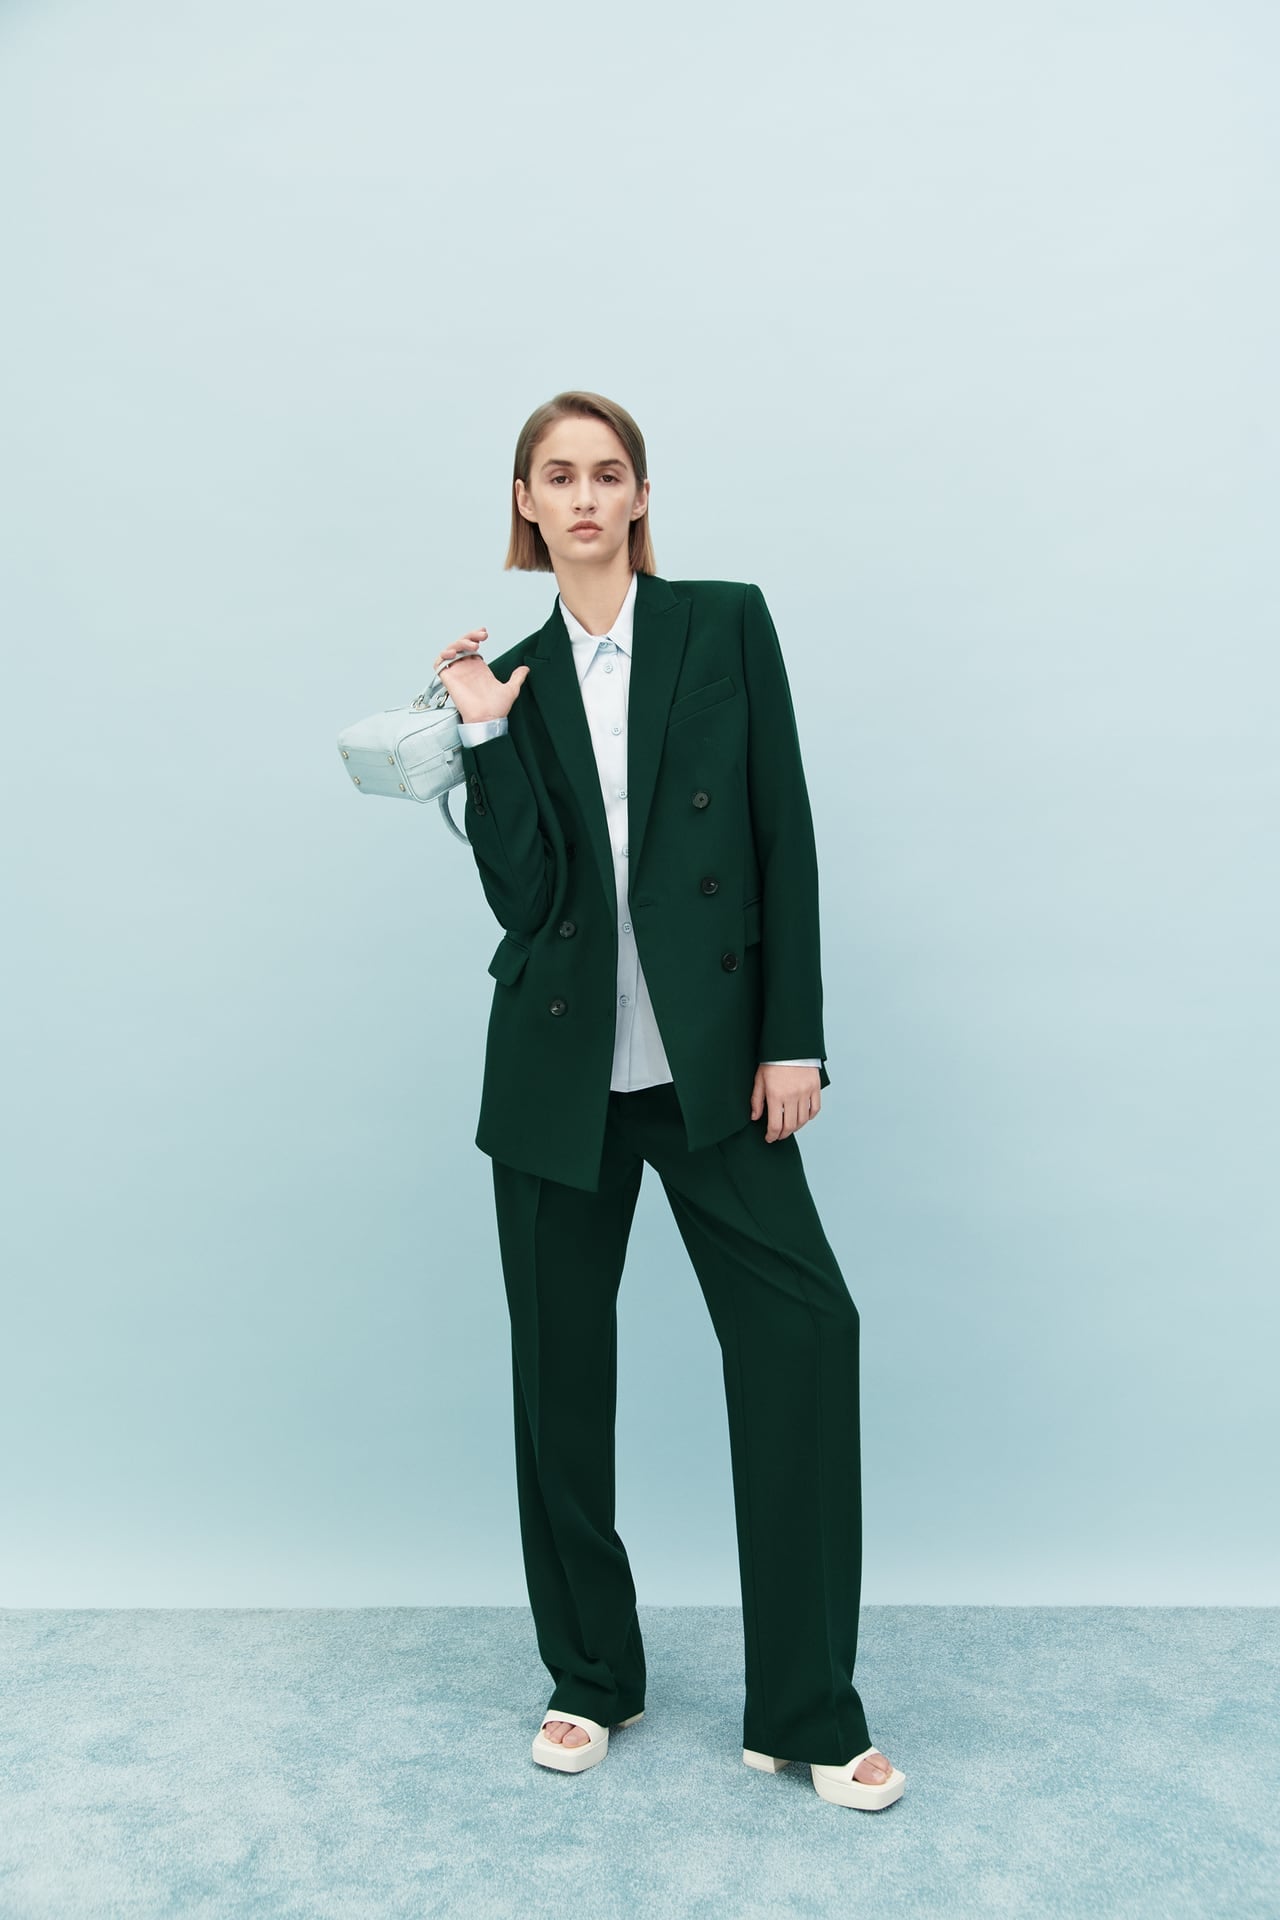 A Double Breasted Suit: Zara Tailored Double Breasted Blazer and Francoise  Pants, Trust Us — Suits Are Going to Be Everywhere This Spring